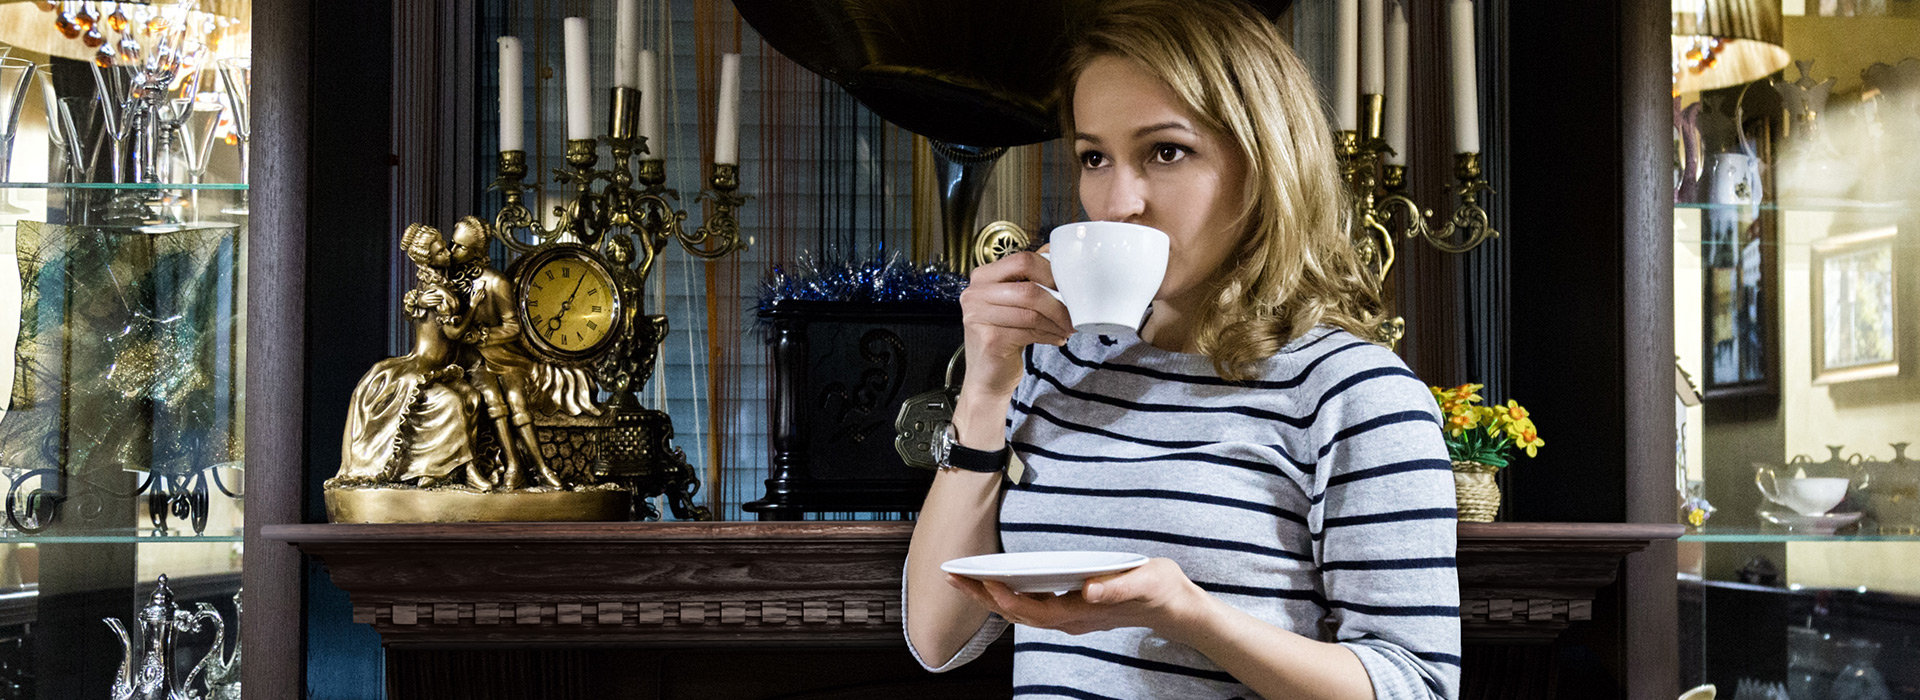 A woman with blonde hair wearing a grey and black striped sweater is drinking tea out of a white tea cup in her right hand and holding the tea plate in her left. She is in front of an elegant dentil mantel fireplace